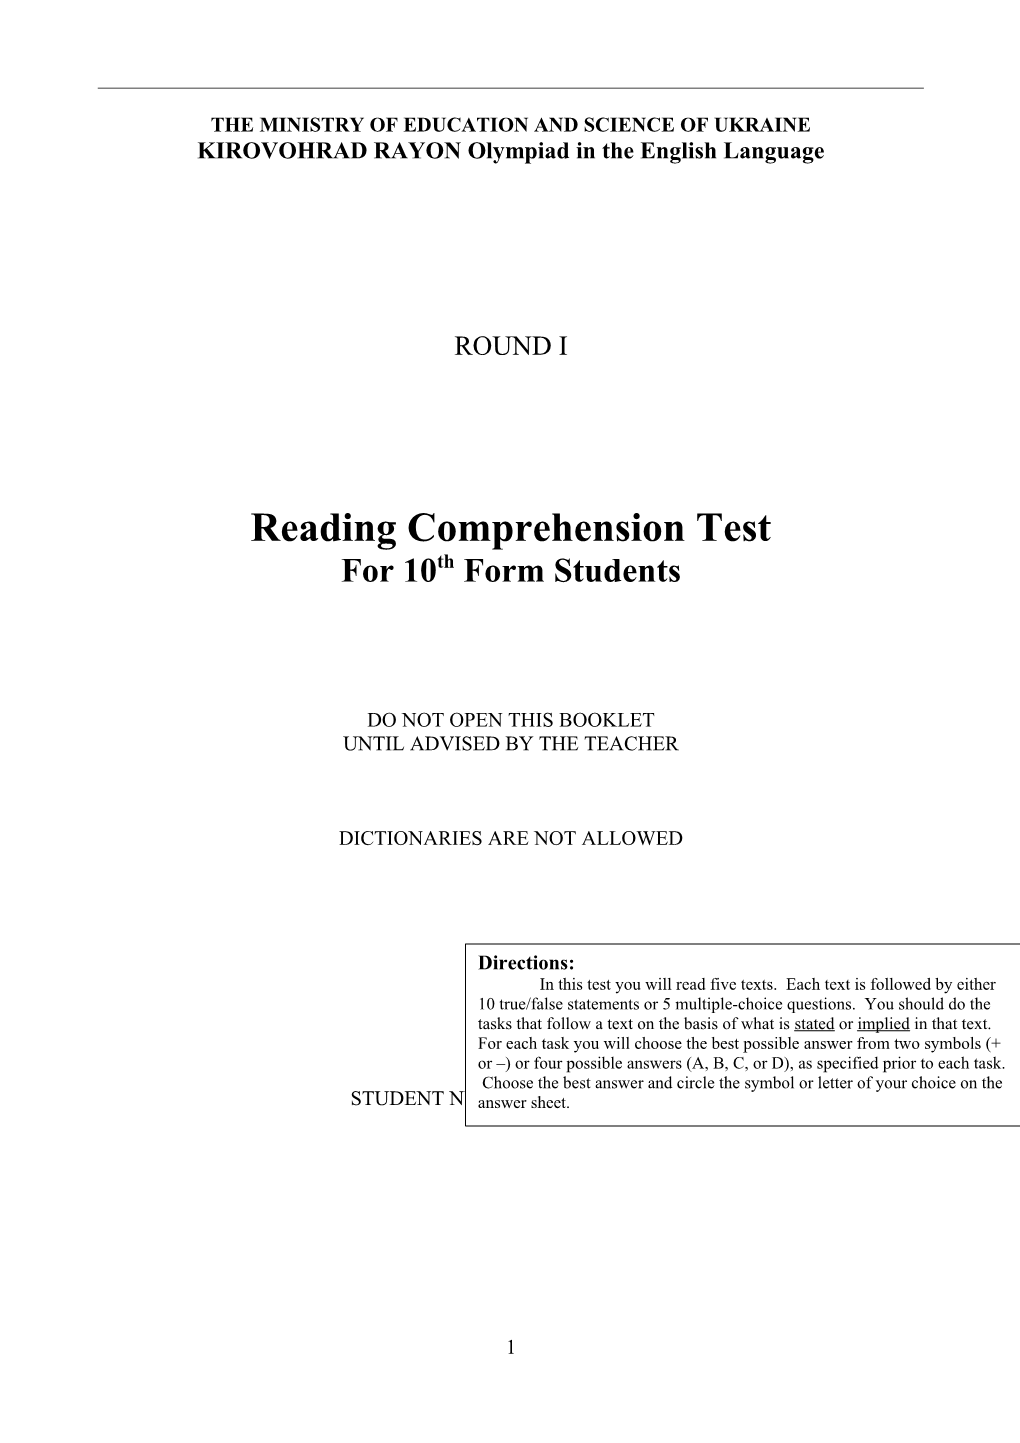 Reading Comprehension Test for 9Th Form Students